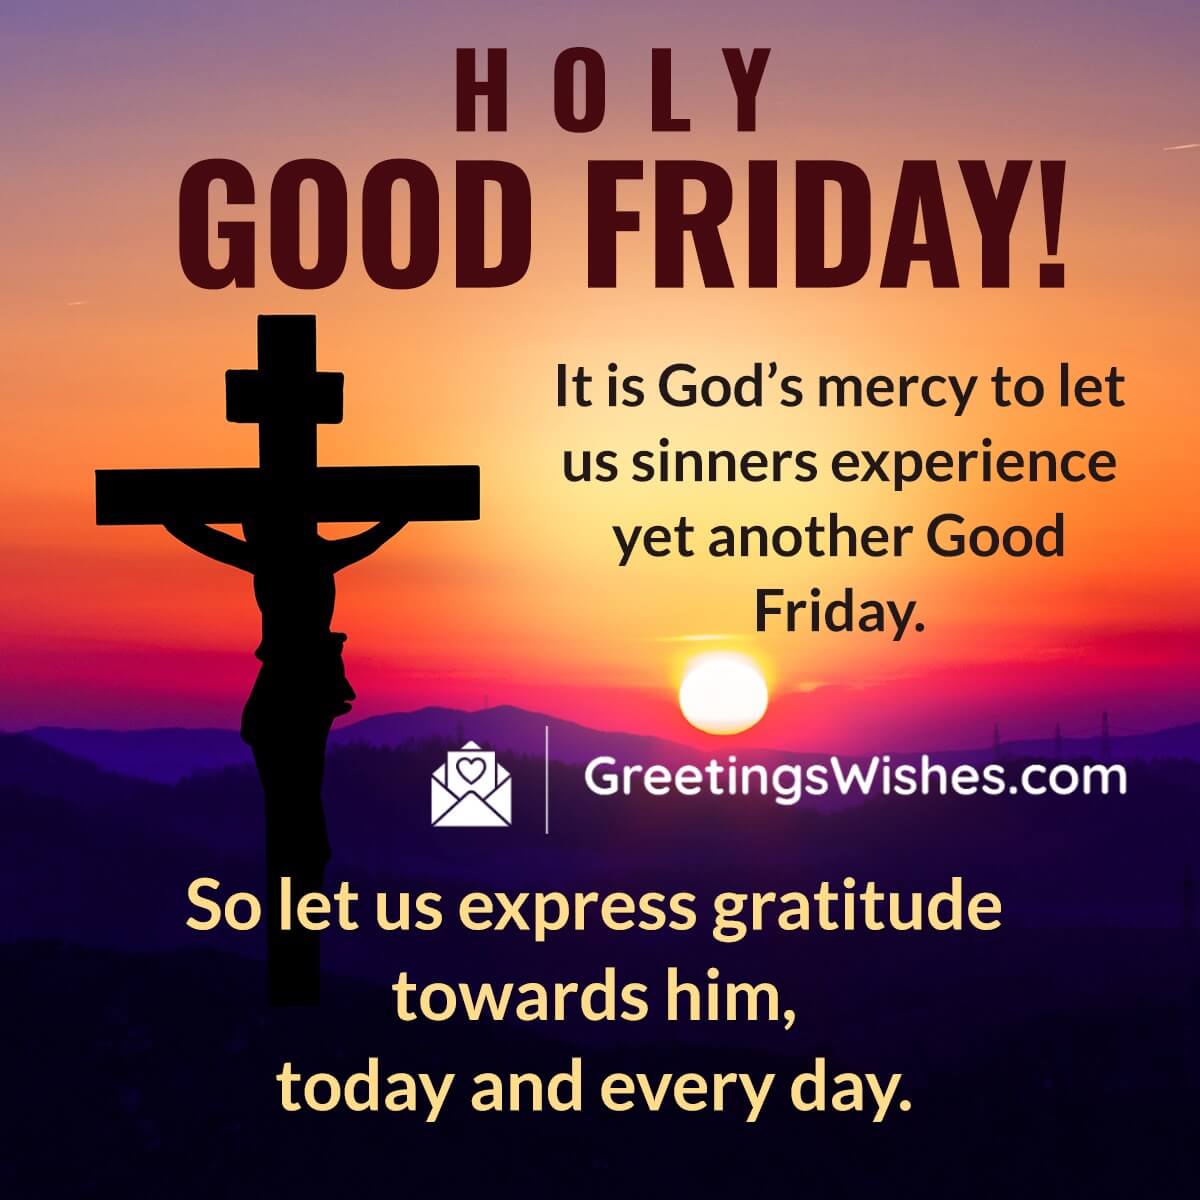 Good Friday Wishes, Messages & Bible verses ( 29 March ) - Greetings Wishes